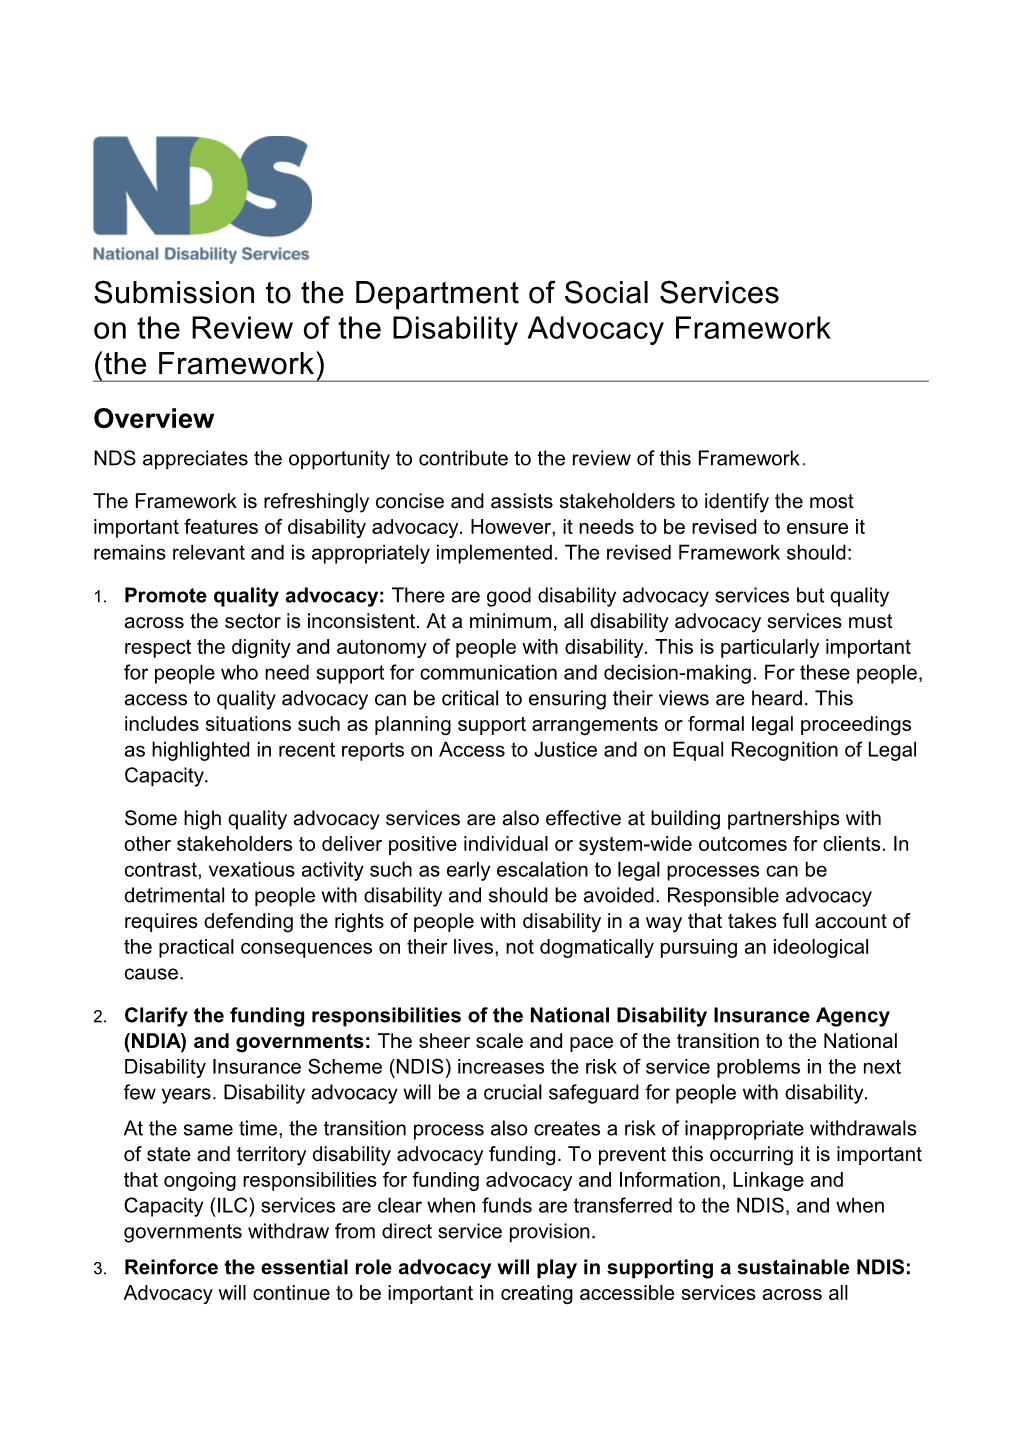 National Disability Services: Submission on the Disability Advocacy Framework